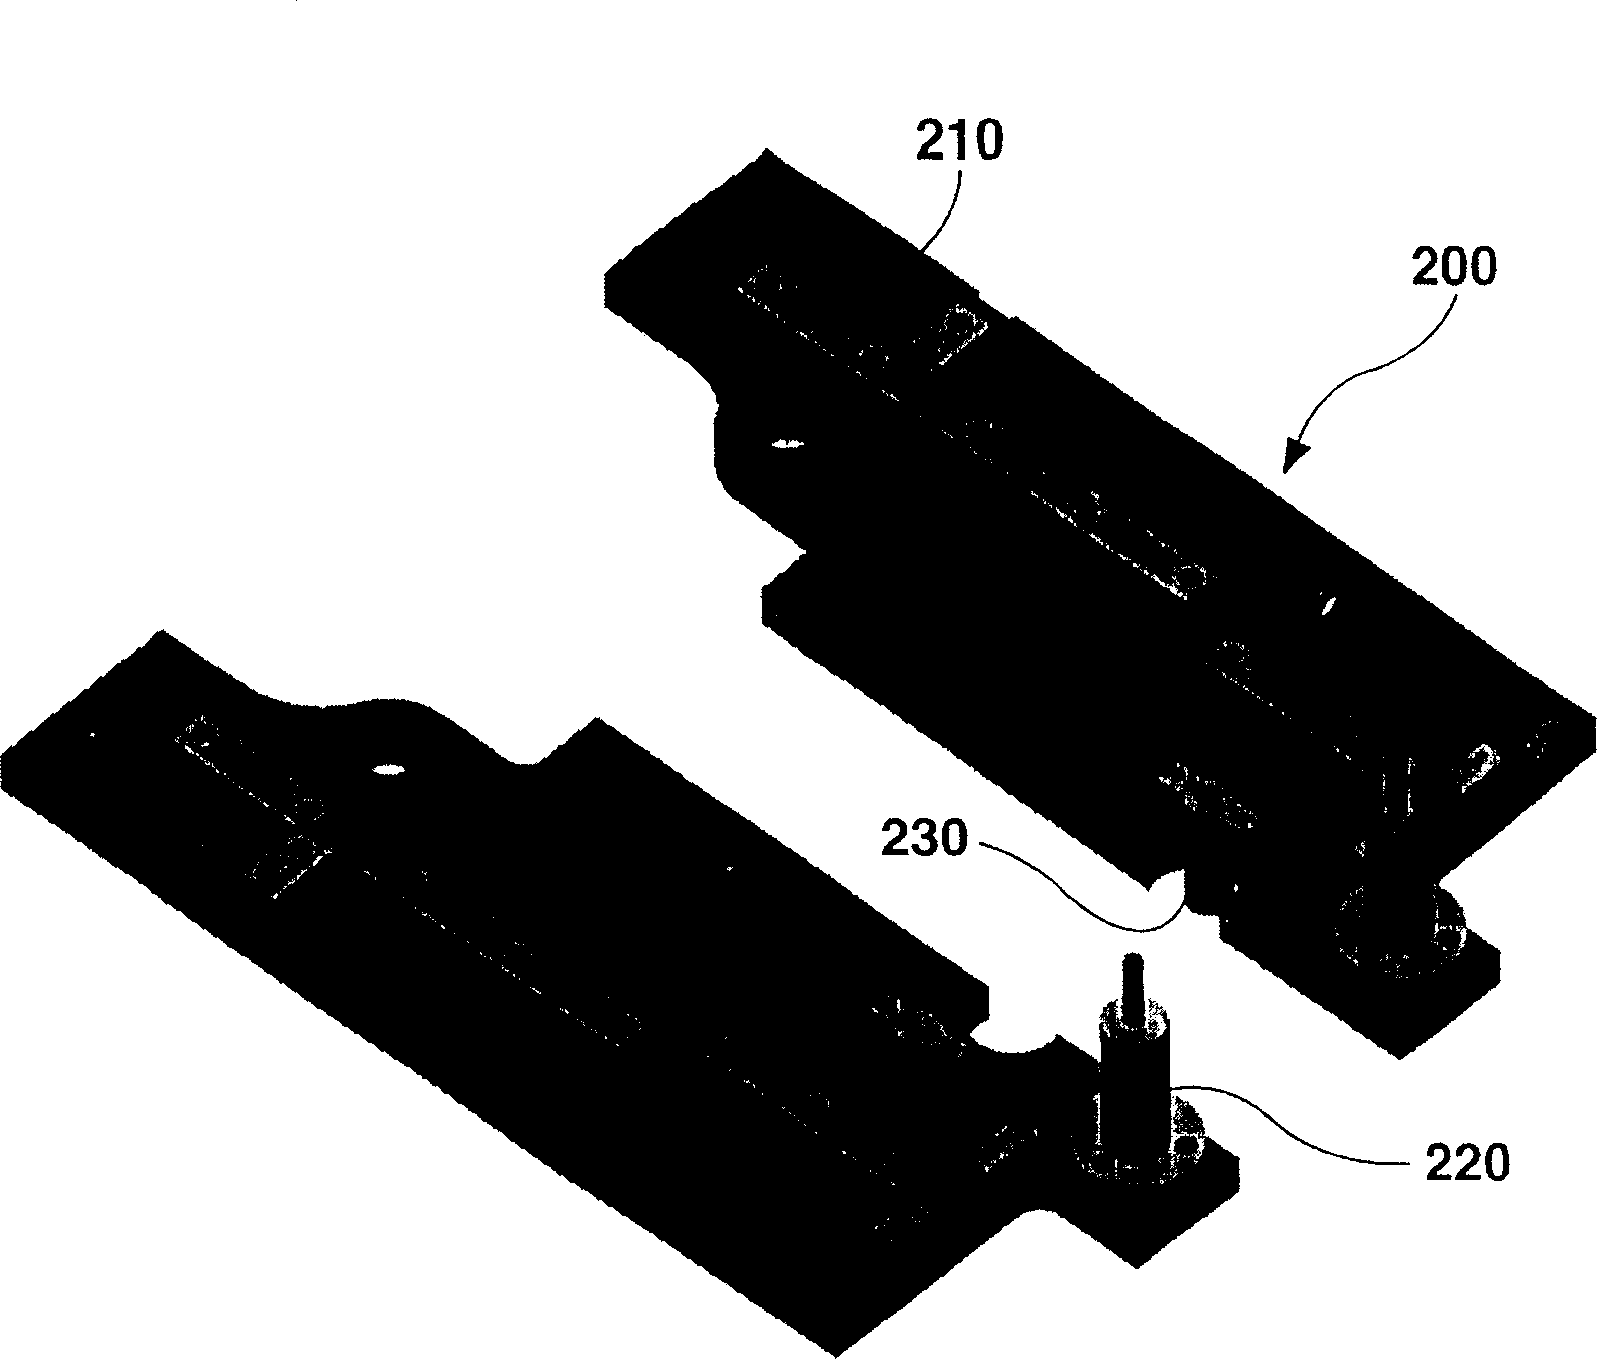 Hydro forming apparatus for making U-shaped products